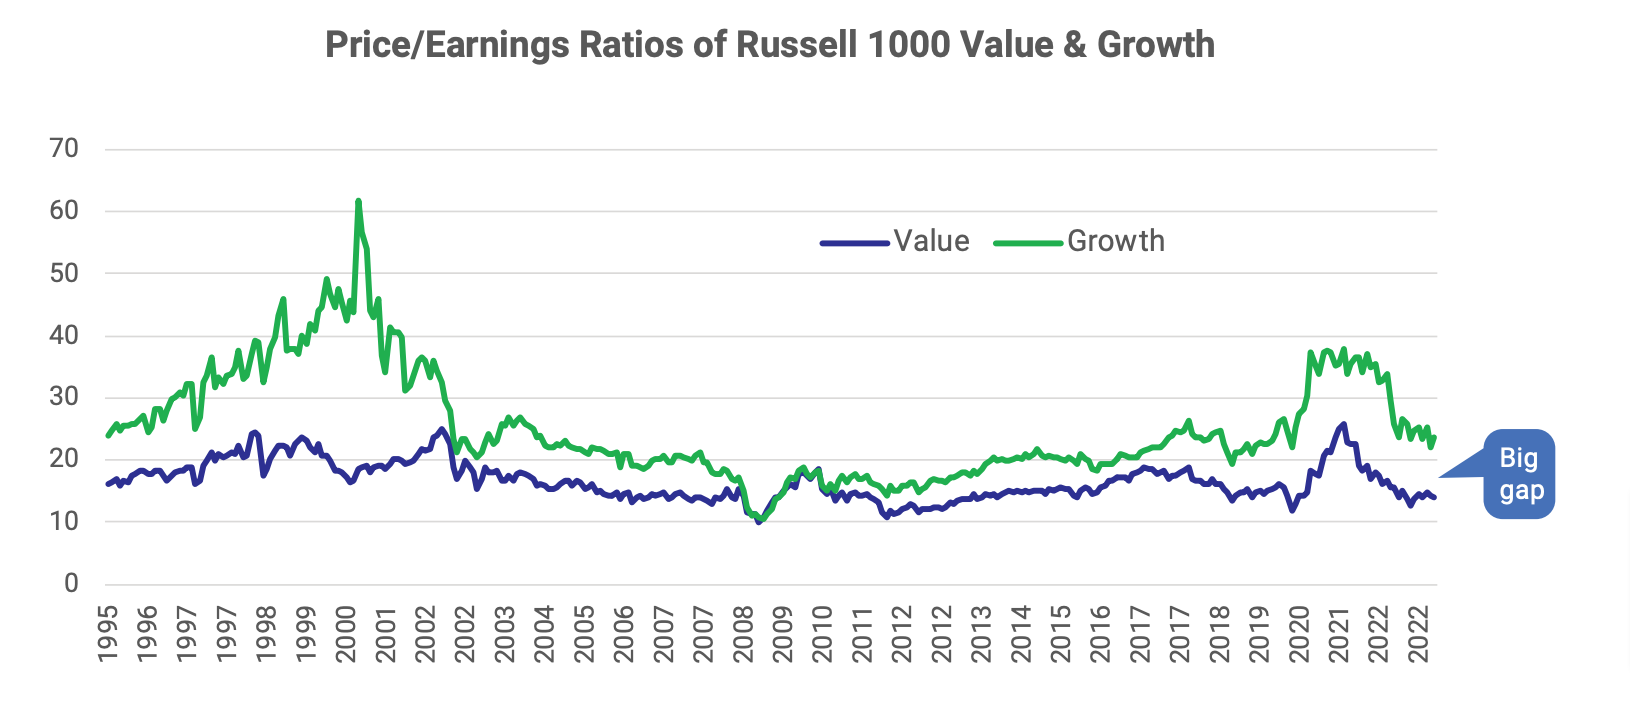 Price/Earnings Ratios of Russell 1000 Value & Growth